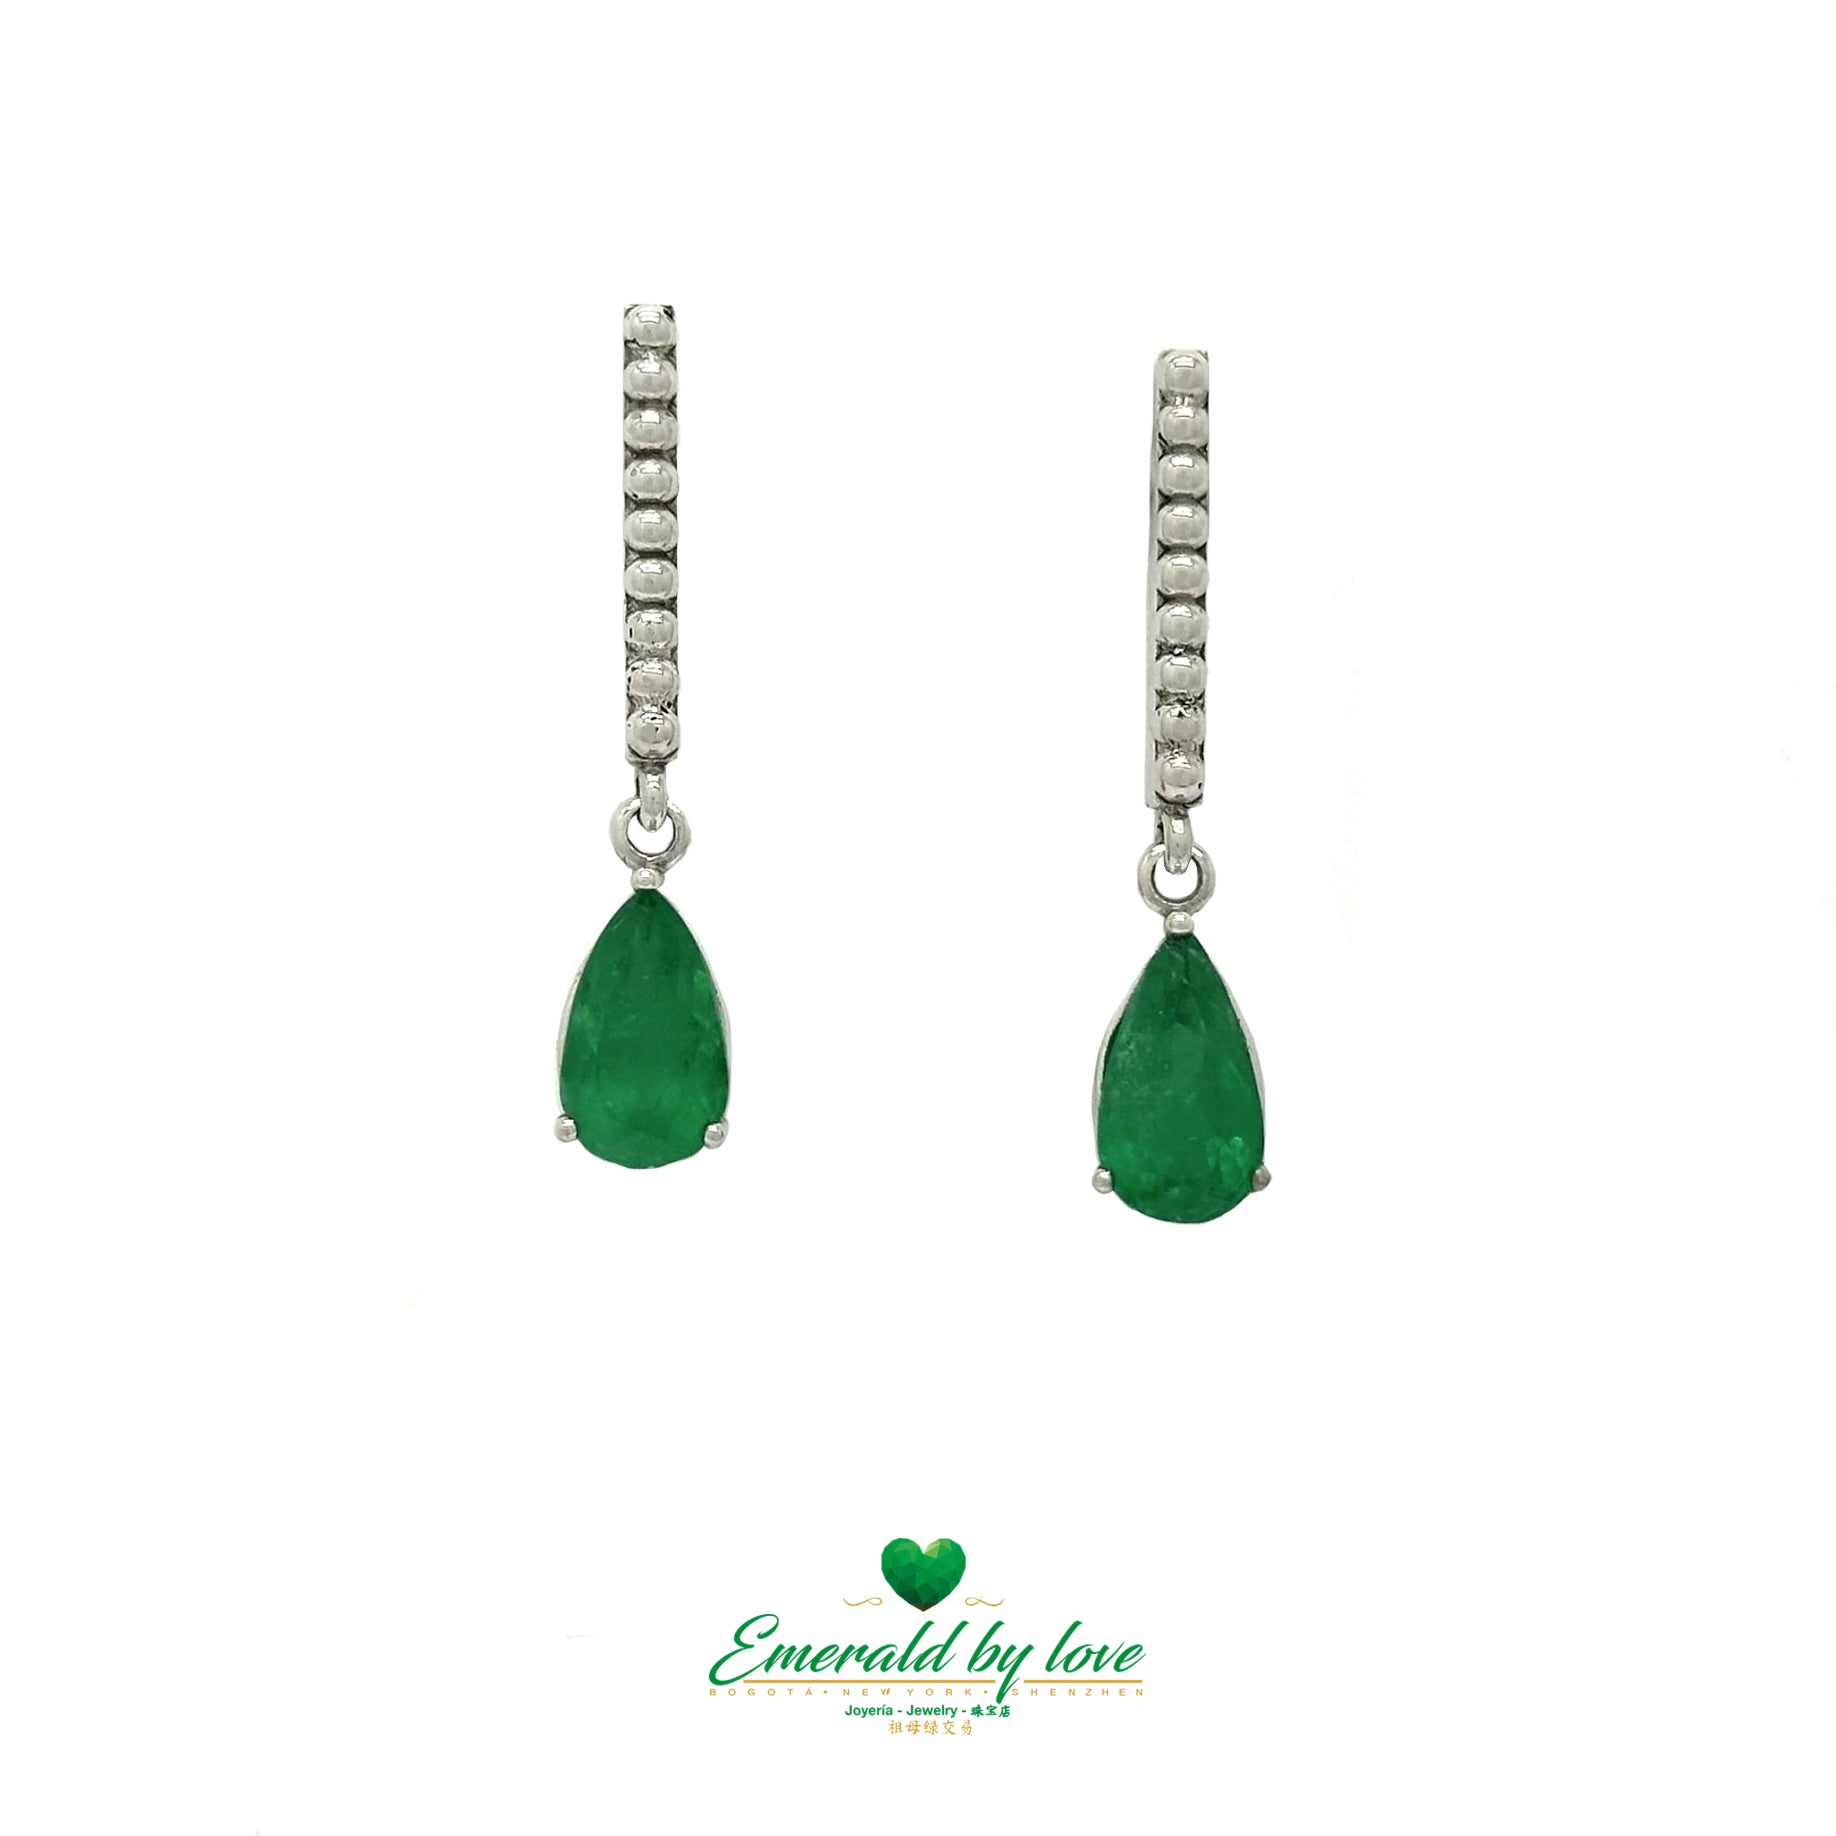 White Gold Serenity: Teardrop Emerald Earrings with Lengthwise Texture